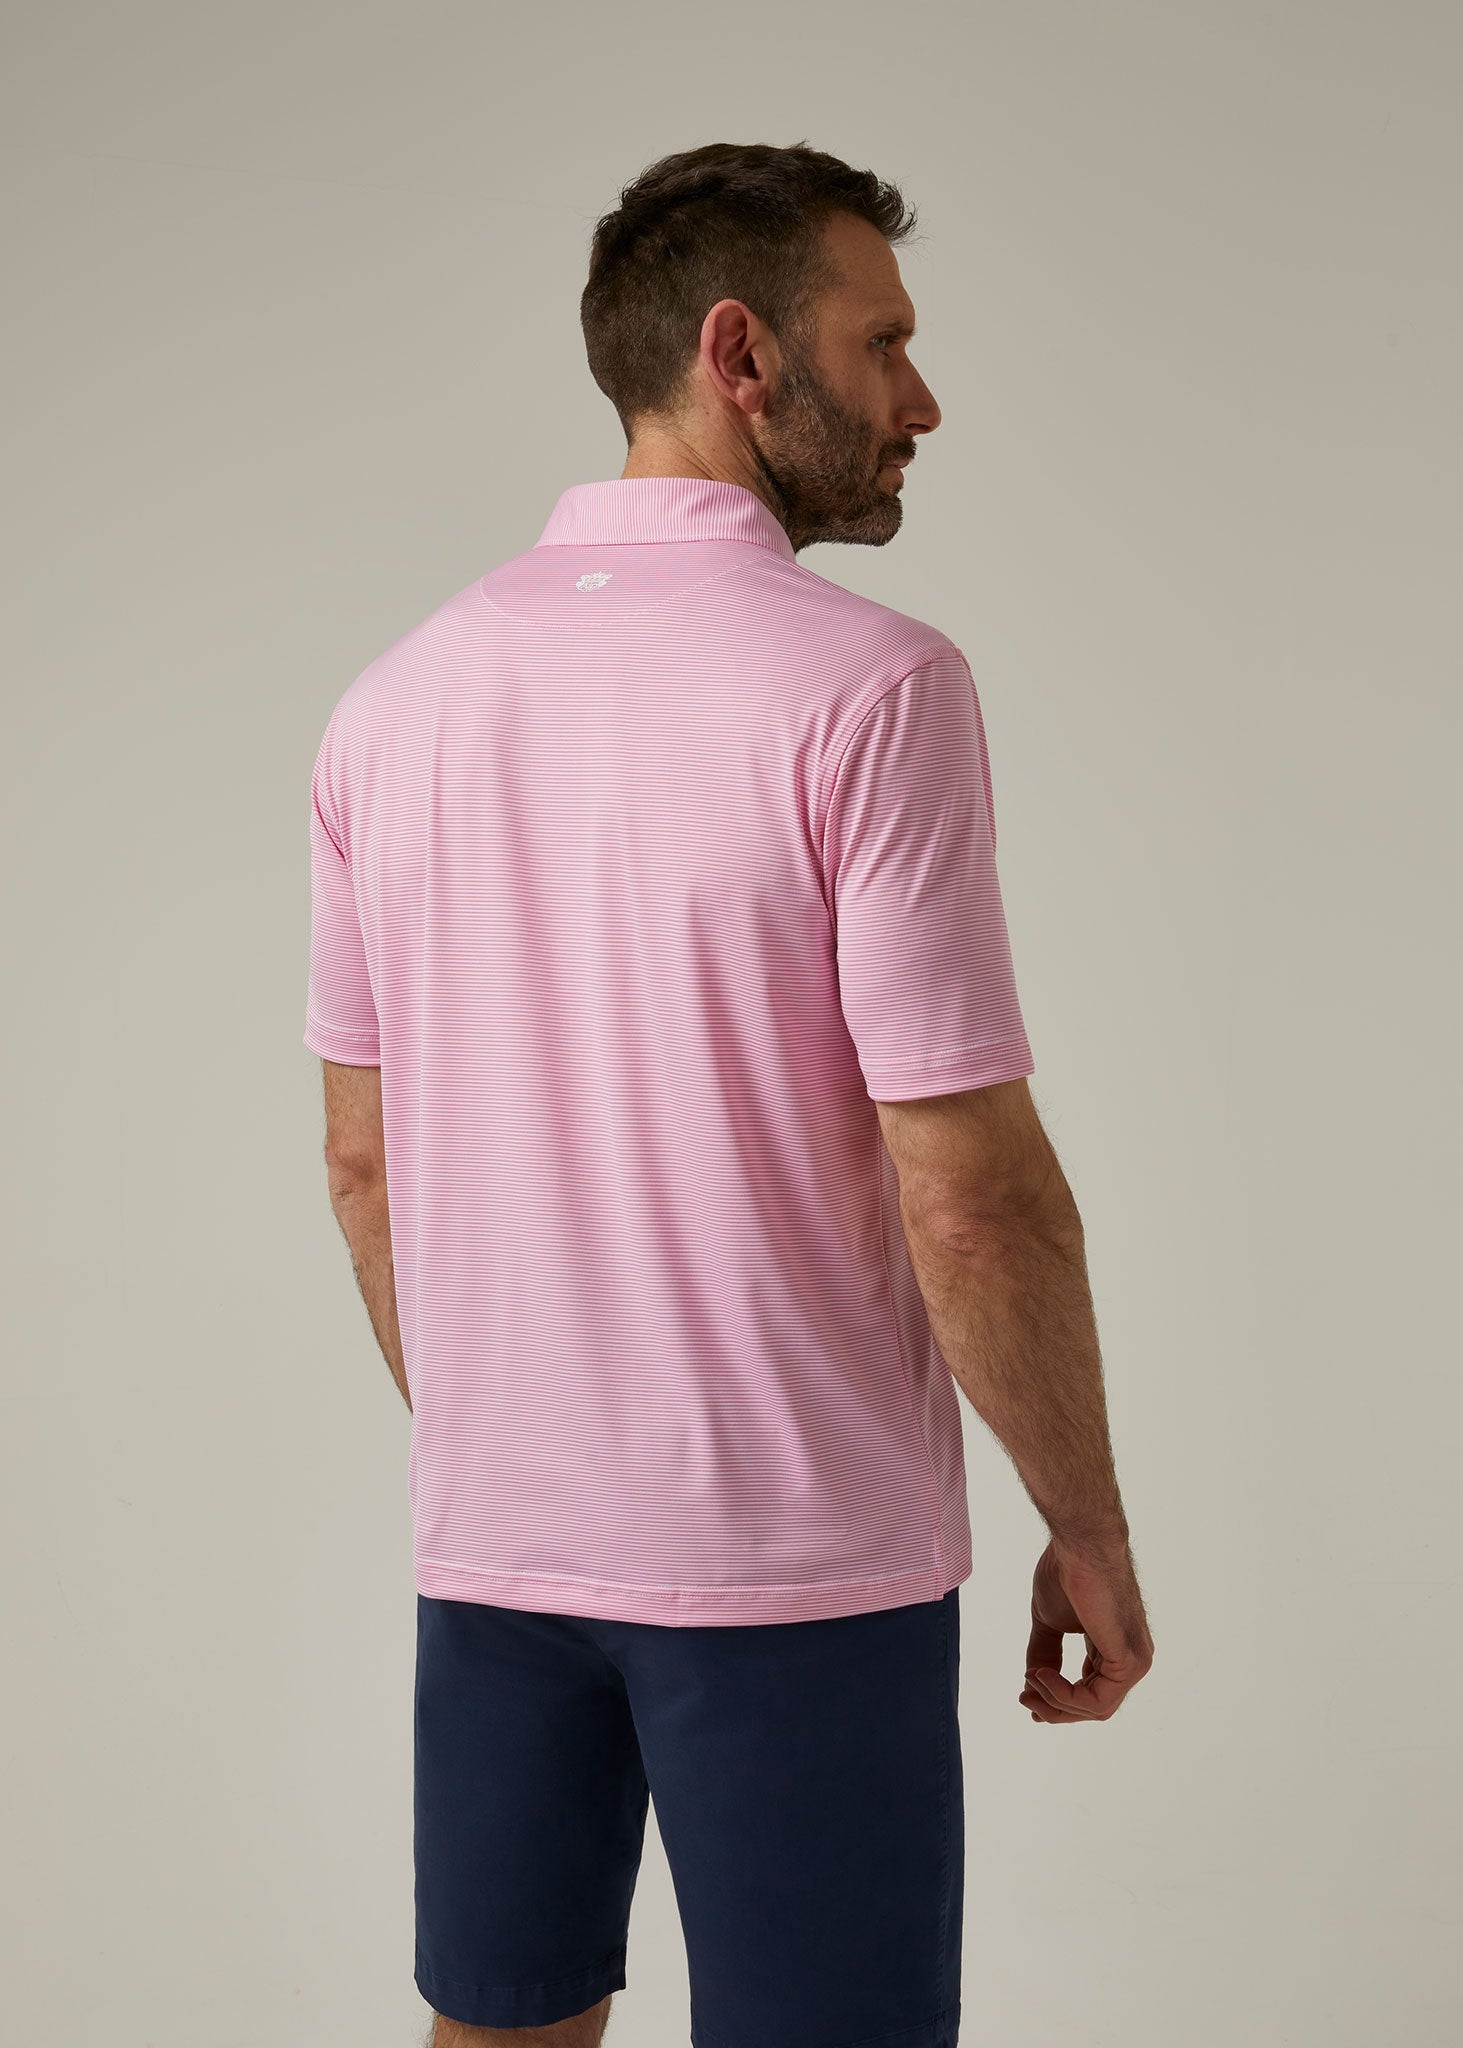 Striped short sleeved polo shirt in carnation pink